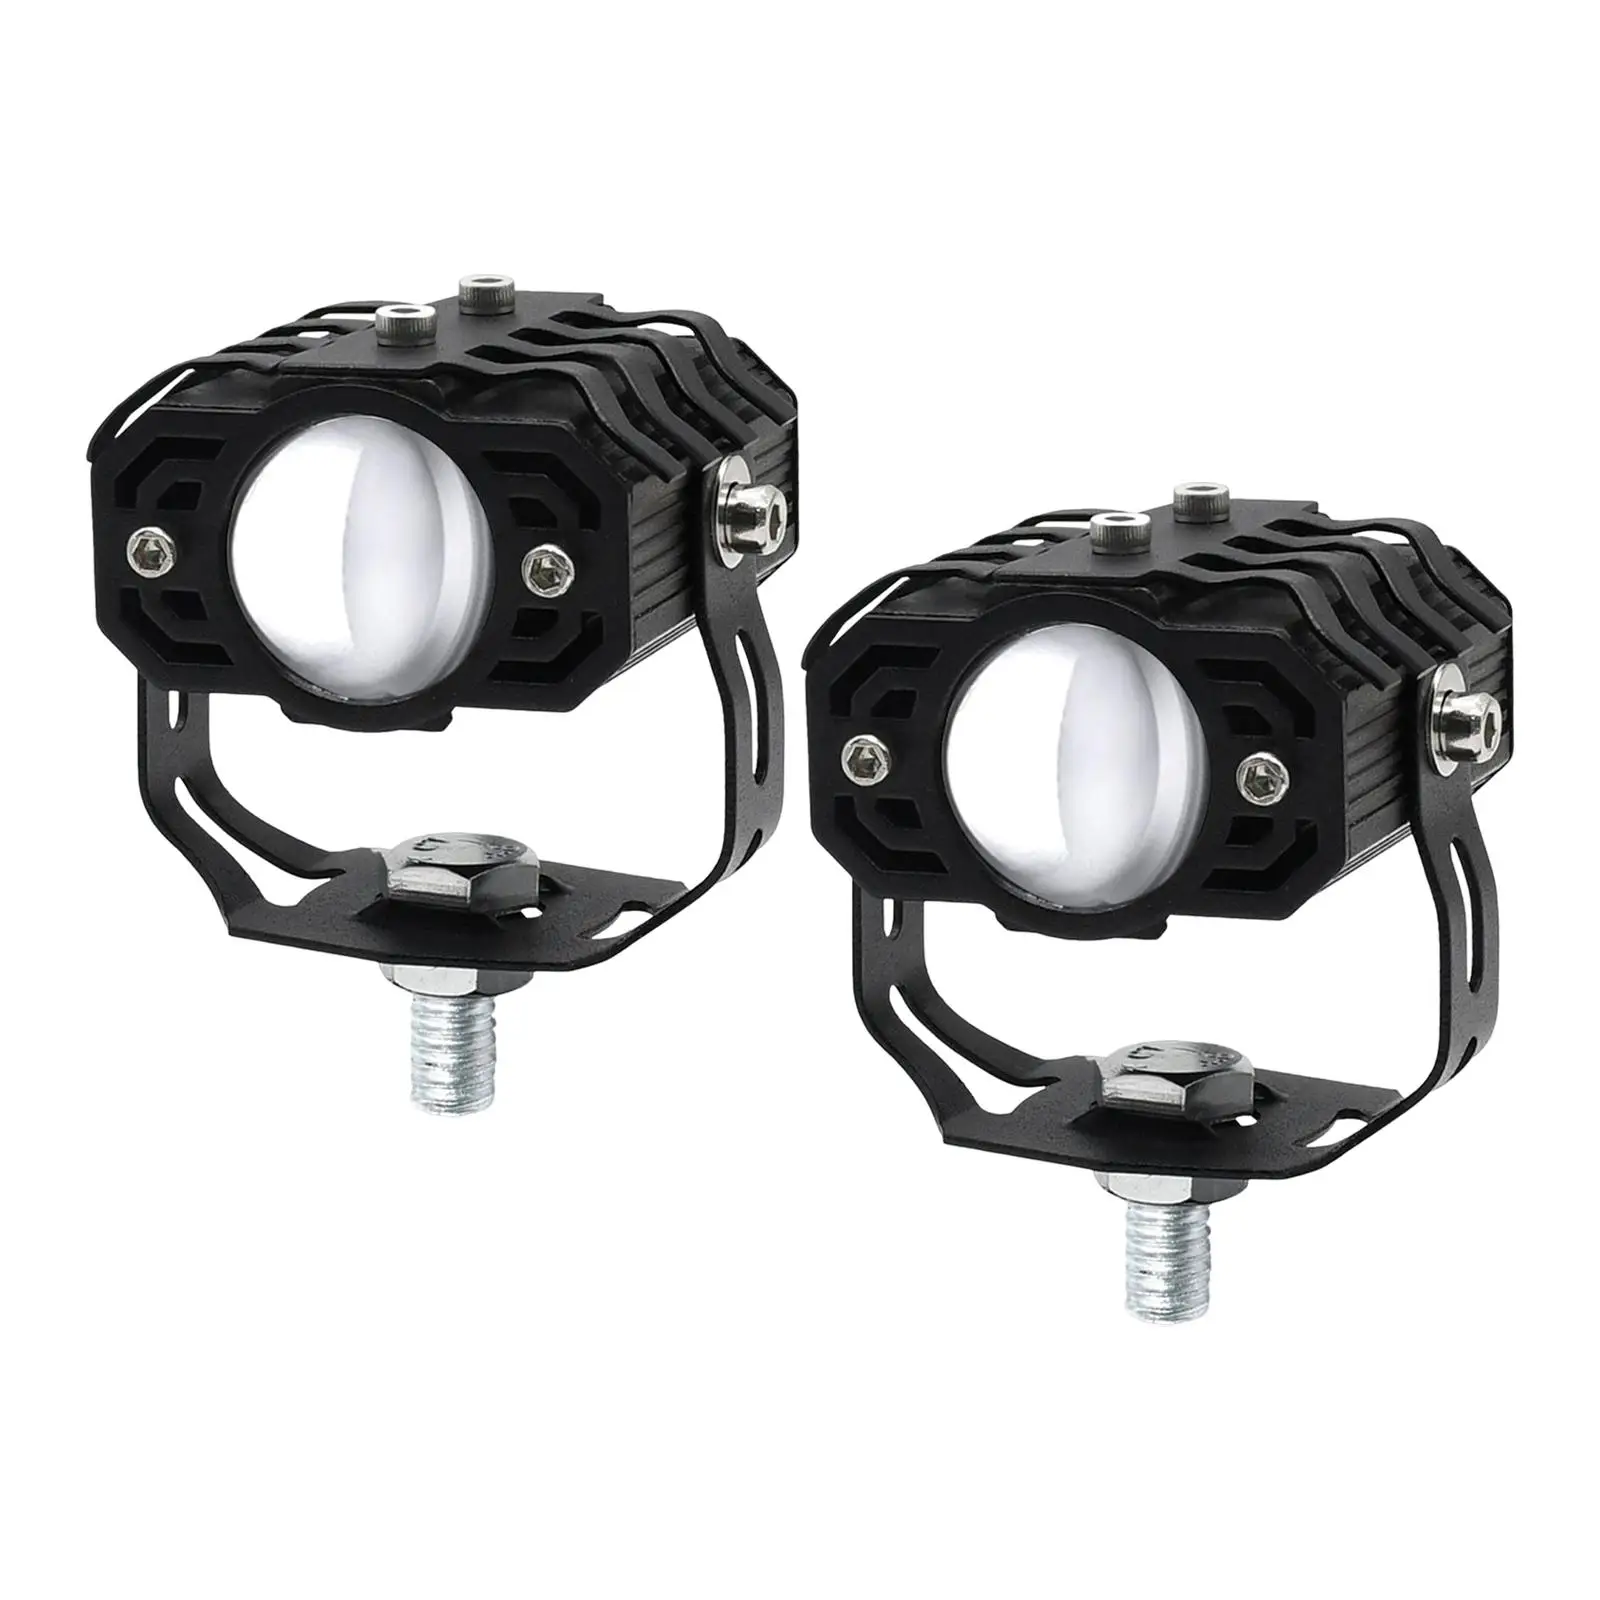 2x Motorcycle Auxiliary Driving Lights Spotlight LED Headlight for ATV